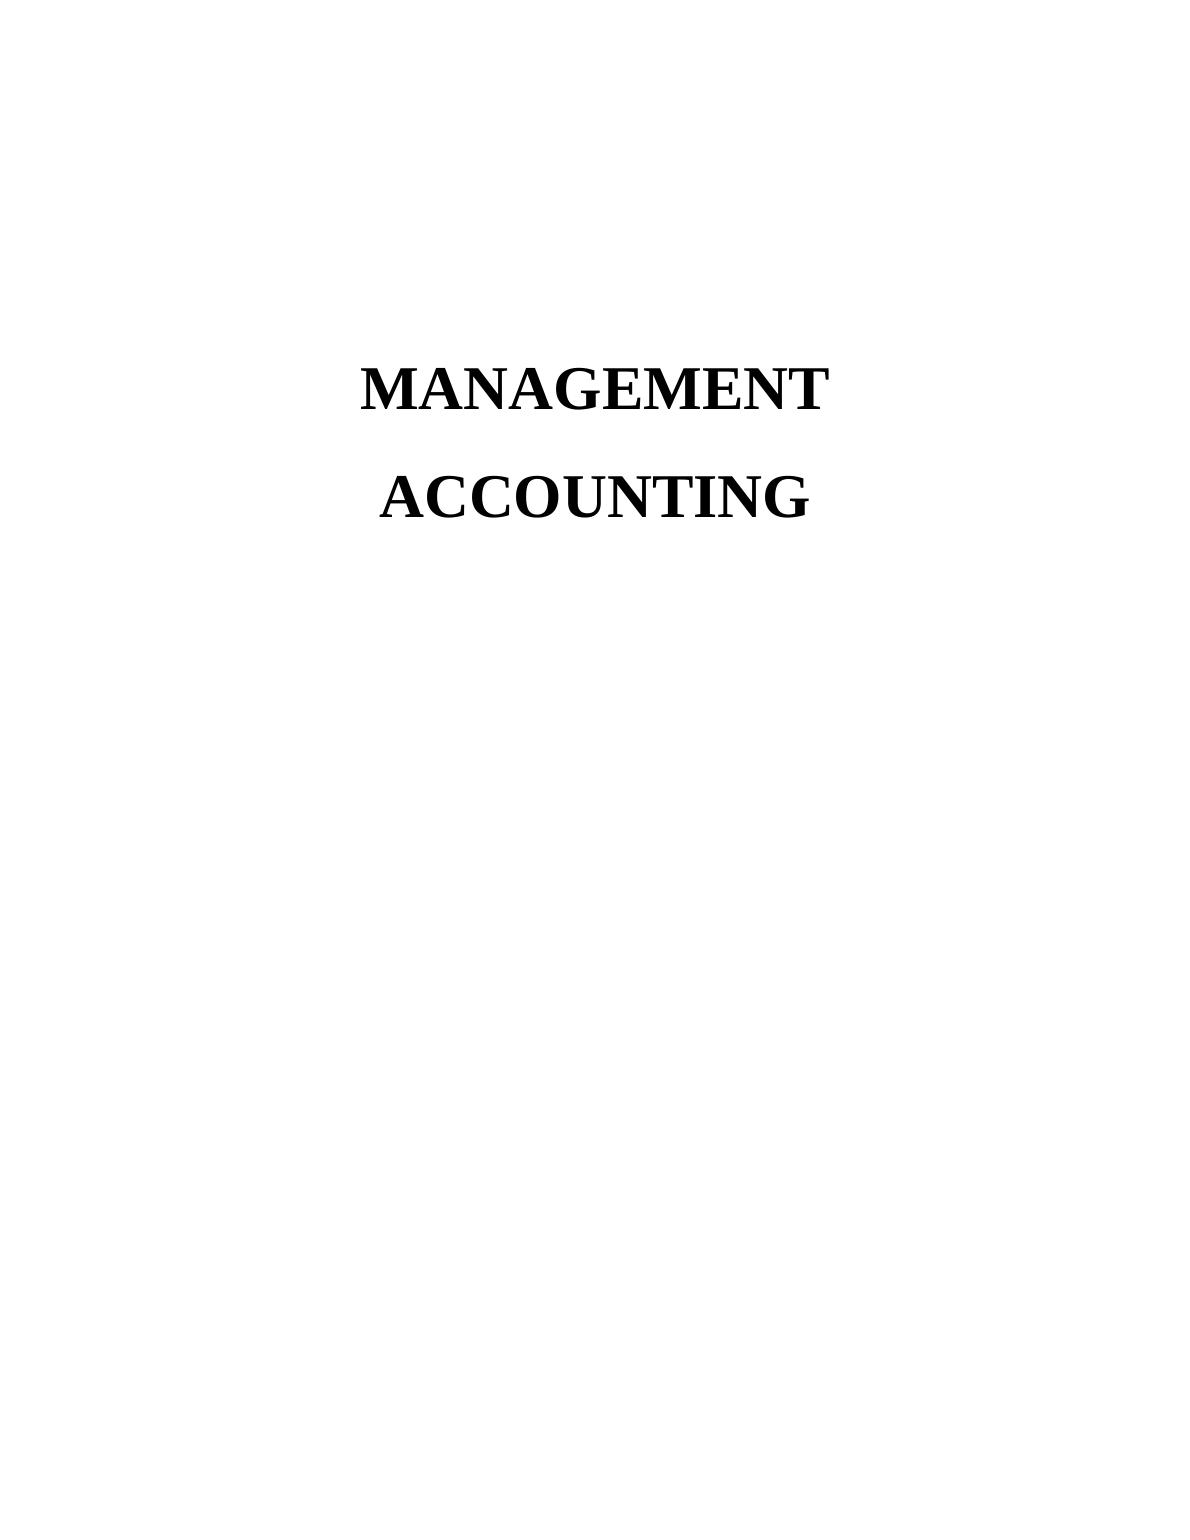 Variance Analysis for Assessing Manager Performance in Management Accounting_1